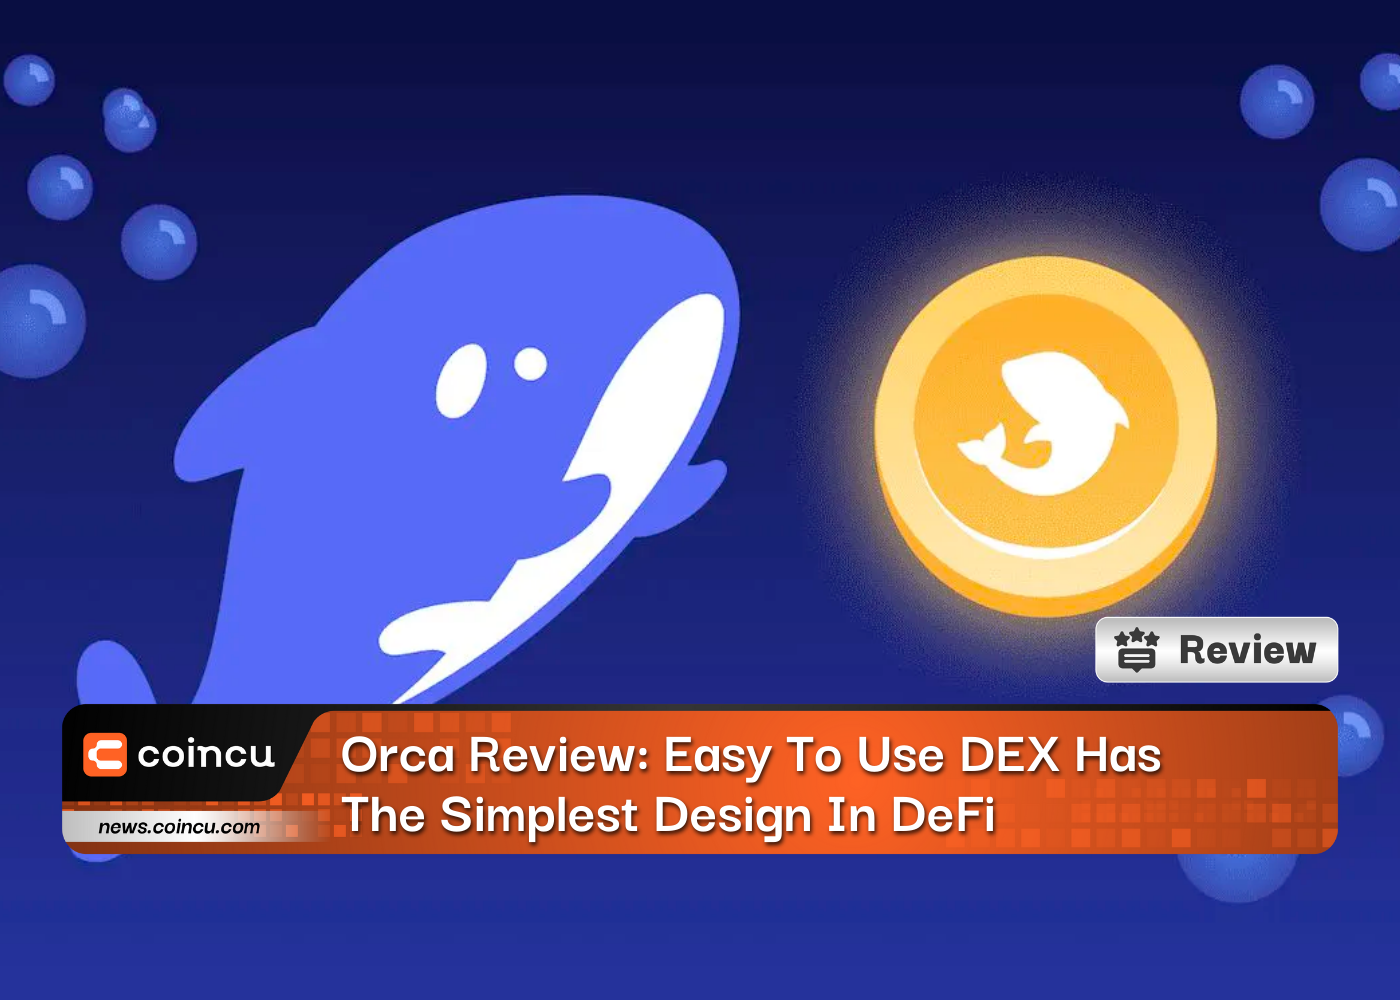 Orca Review: Easy To Use DEX Has The Simplest Design In DeFi